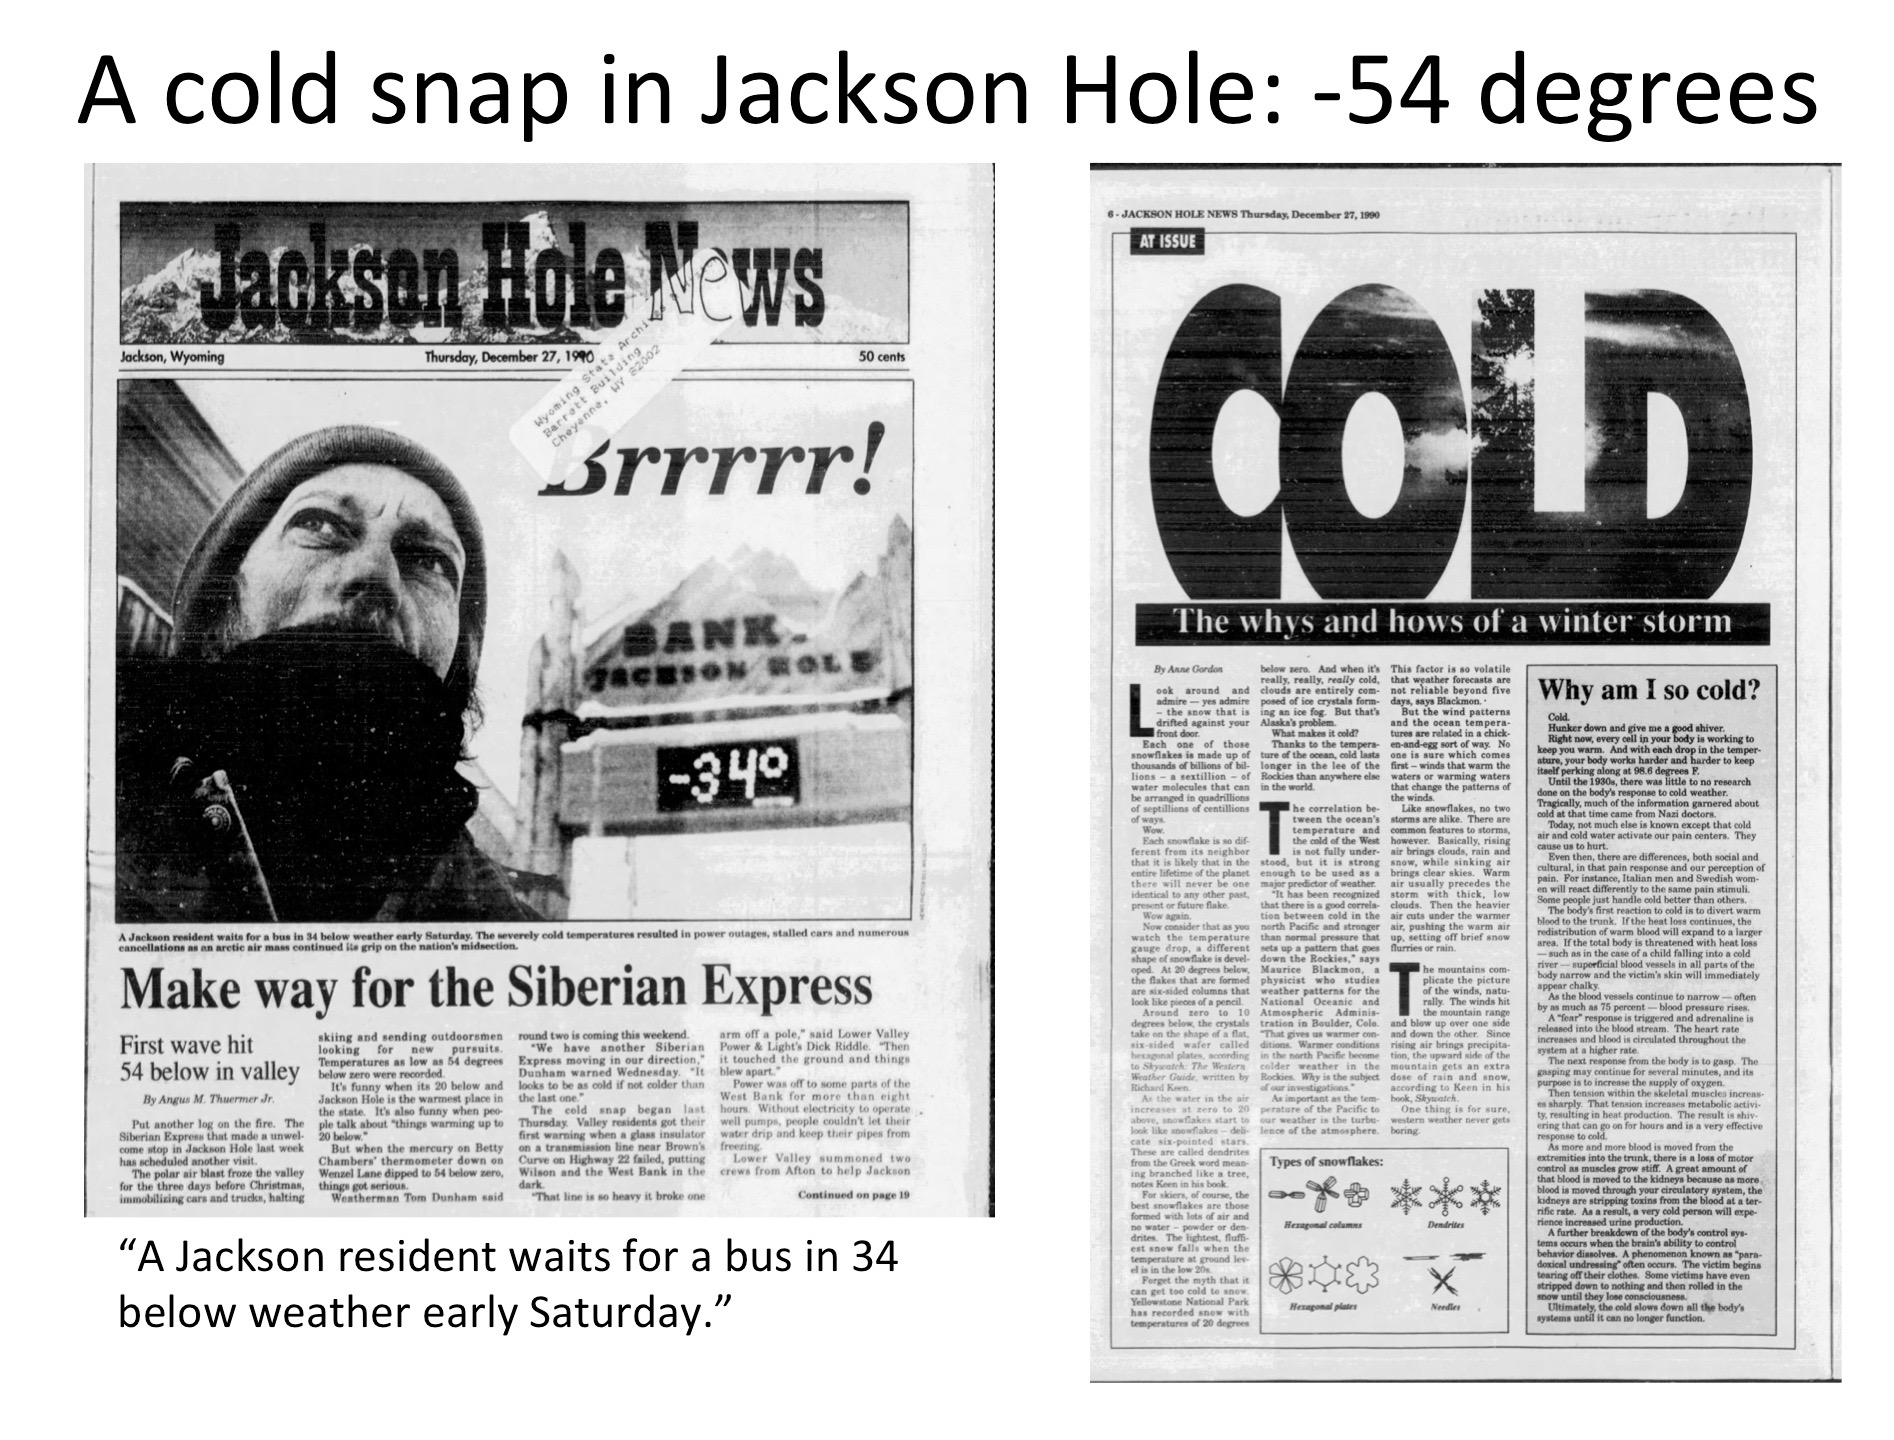 Photo of the front page and another full page from the Jackson Hole News showing a person bundled up next to a banking sign reading -34 degrees in a parking lot. The photos carry a header A cold snap in Jackson Hole: -54 degrees.